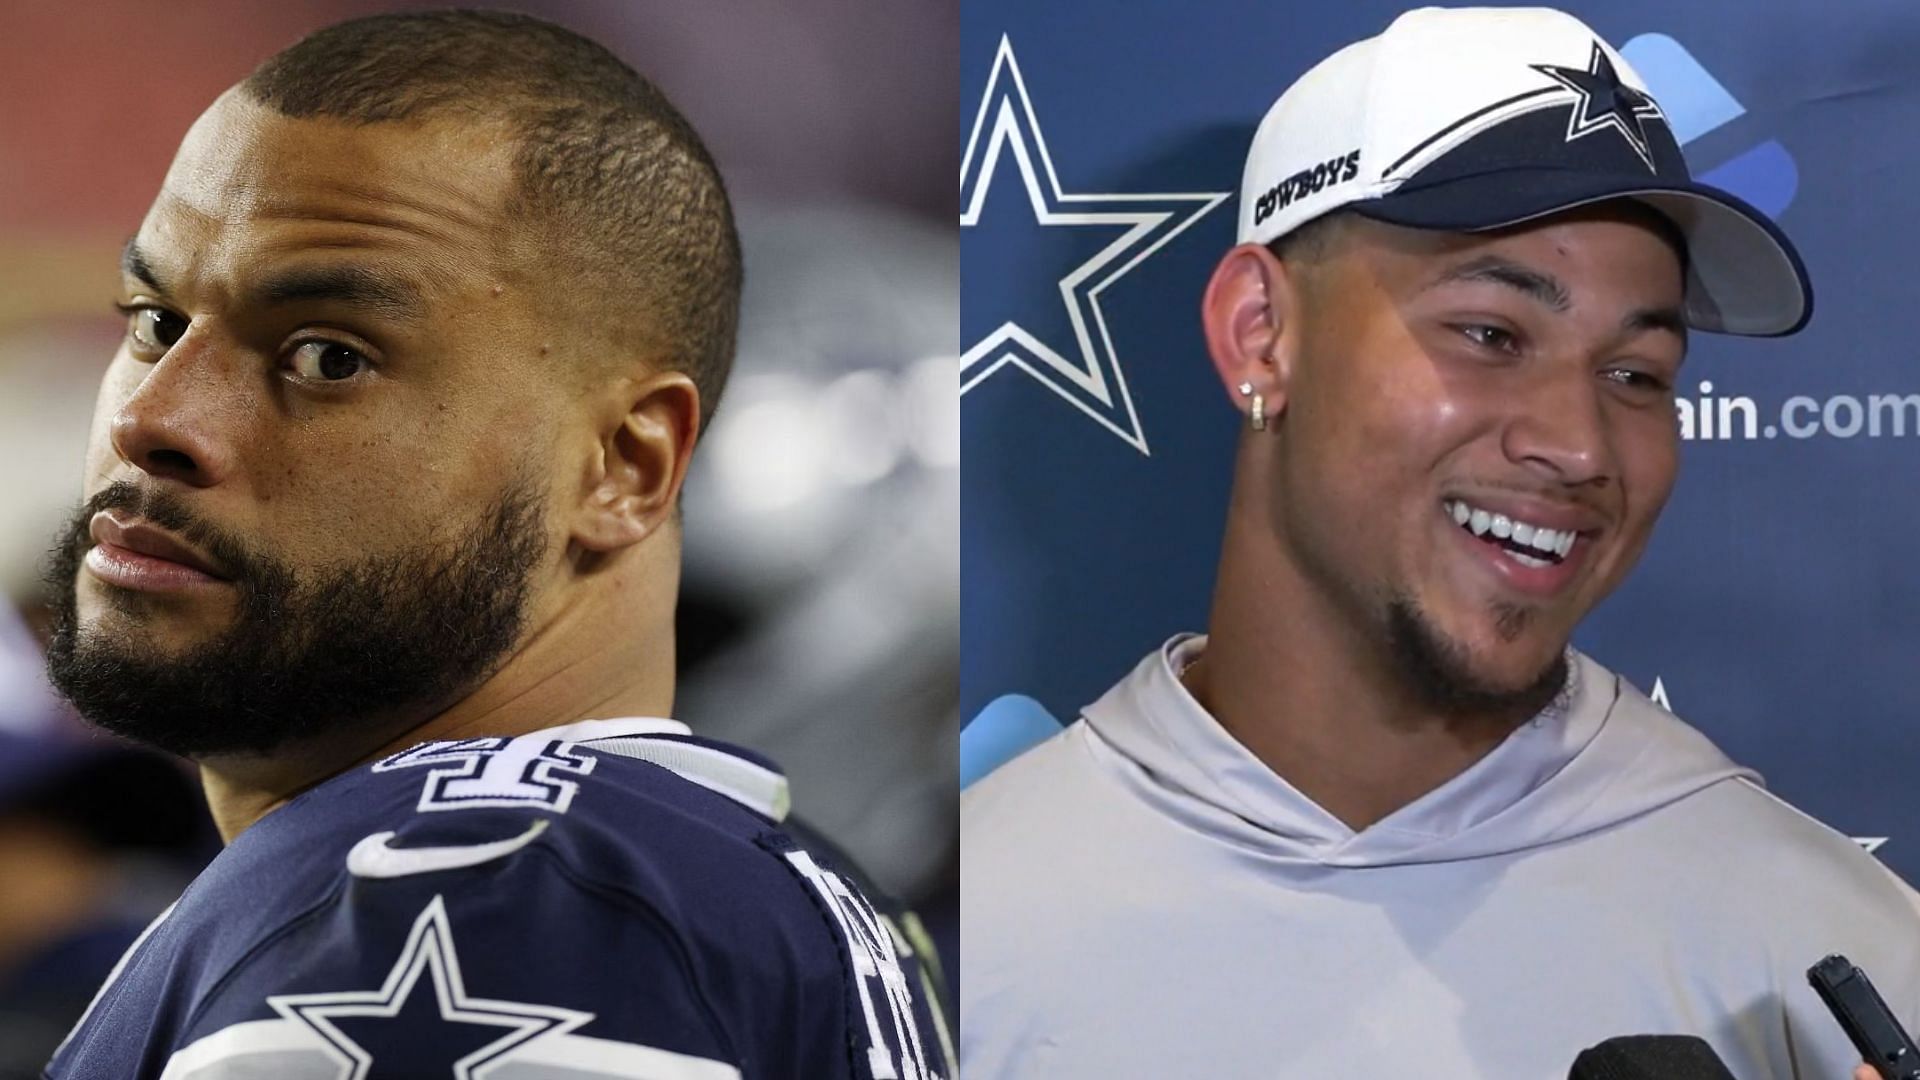 According to a former NFL wide receiver, Dak Prescott must do better in 2023 or he might risk losing his job to Trey Lance. (Image credit: DallasCowboys.com)